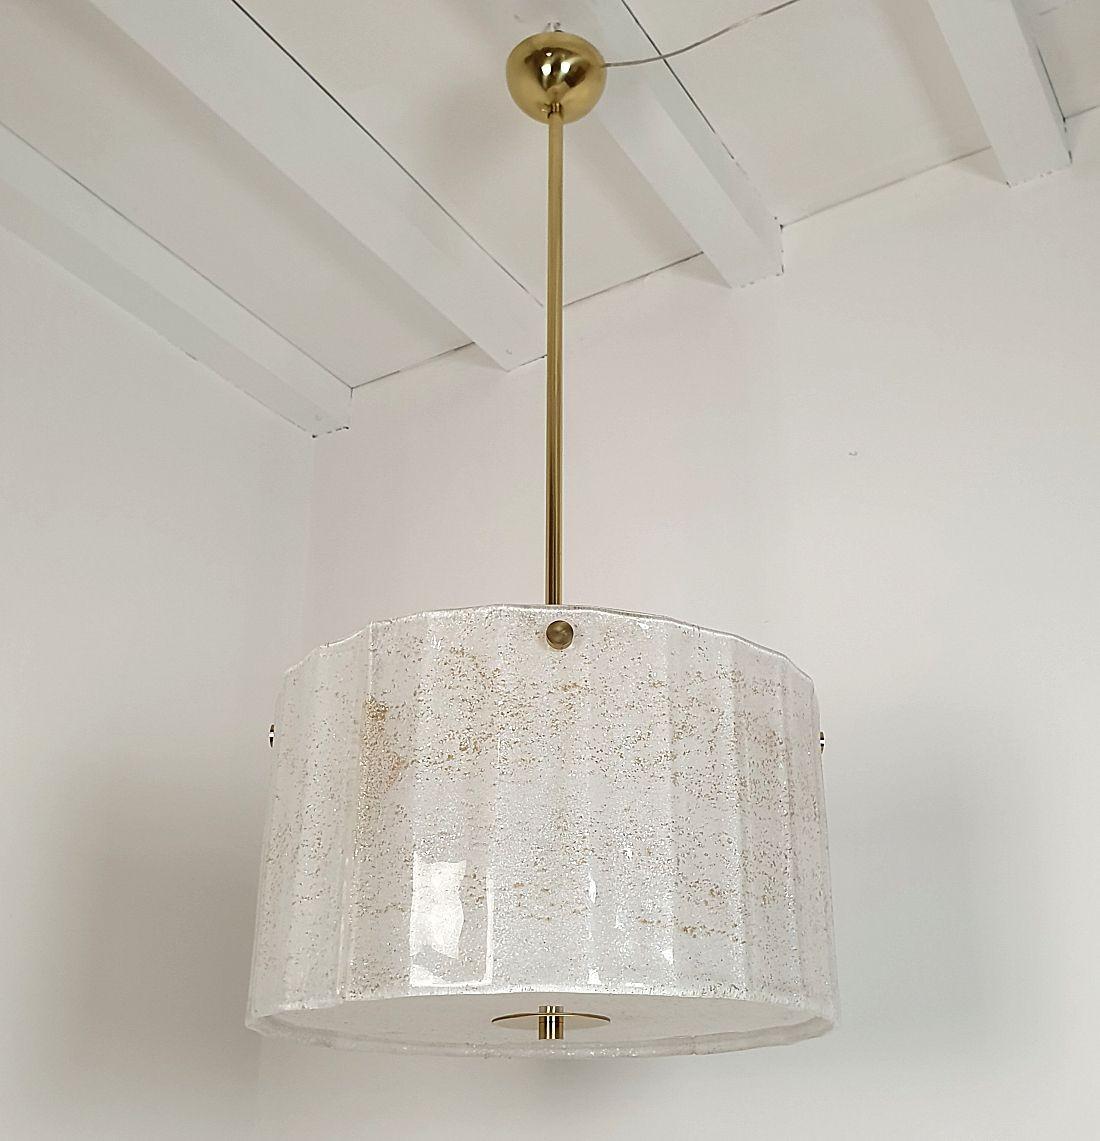 Large white Murano glass drum chandelier, attributed to Mazzega, Italy 1970s.
The Mid-Century Modern chandelier is made of white thick Murano glass, with real gold flakes.
The frame and central stem are in brass. The height of the central stem can